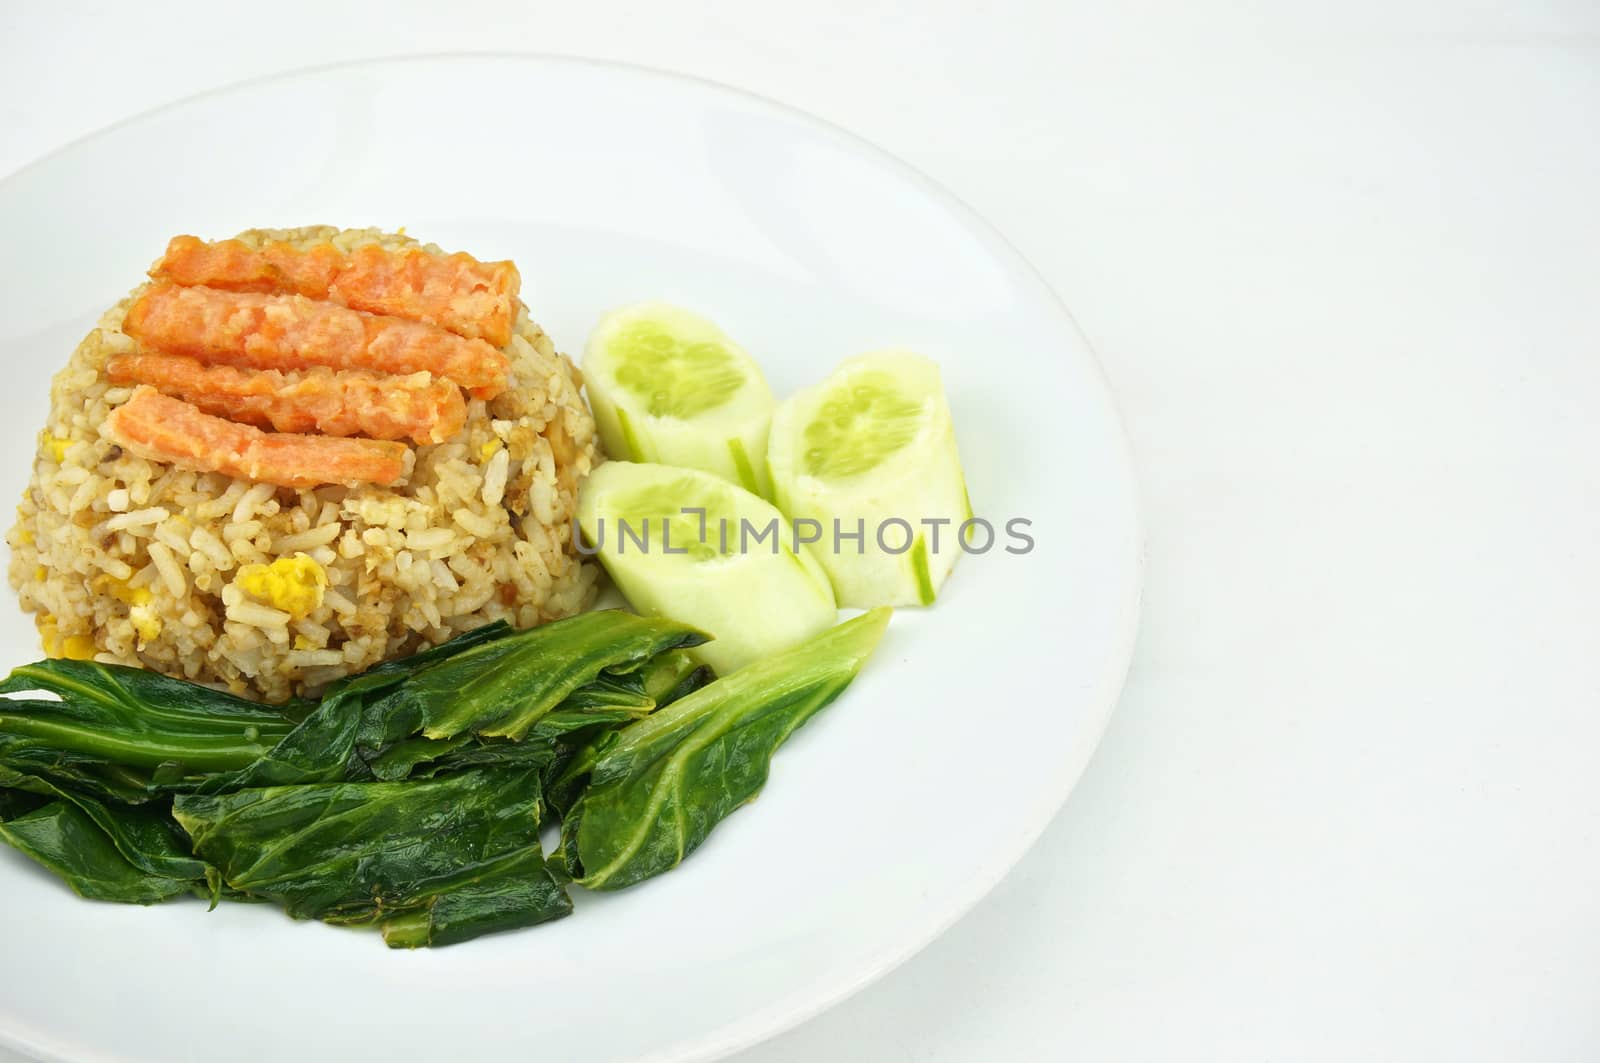 Shrimp fried rice vegetarian with kale, carrots and cucumber on a plate with white background.